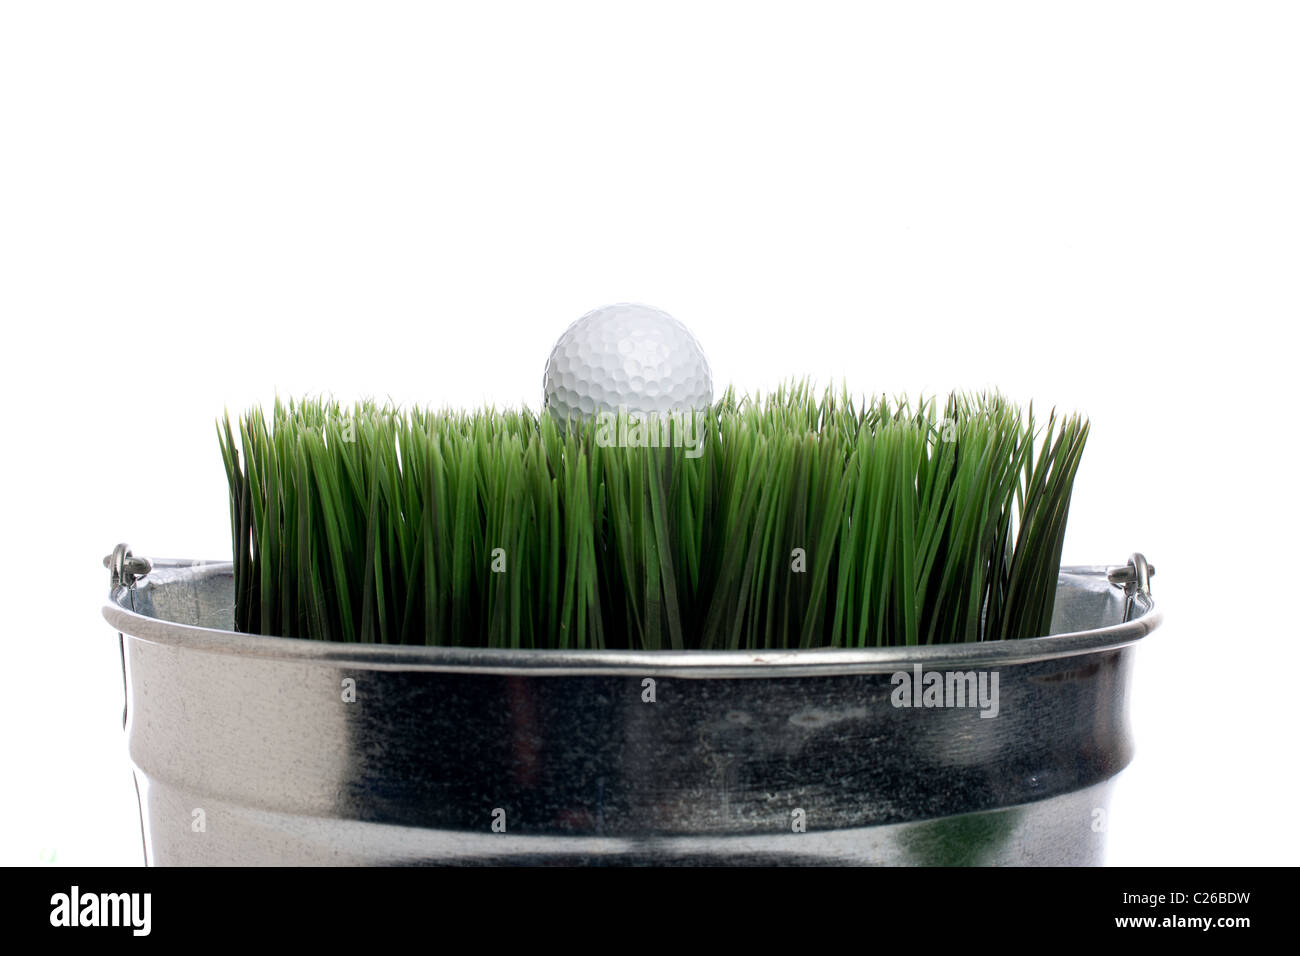 Horizontal image of a golf ball on grass in a small container on white. Container gardening Stock Photo